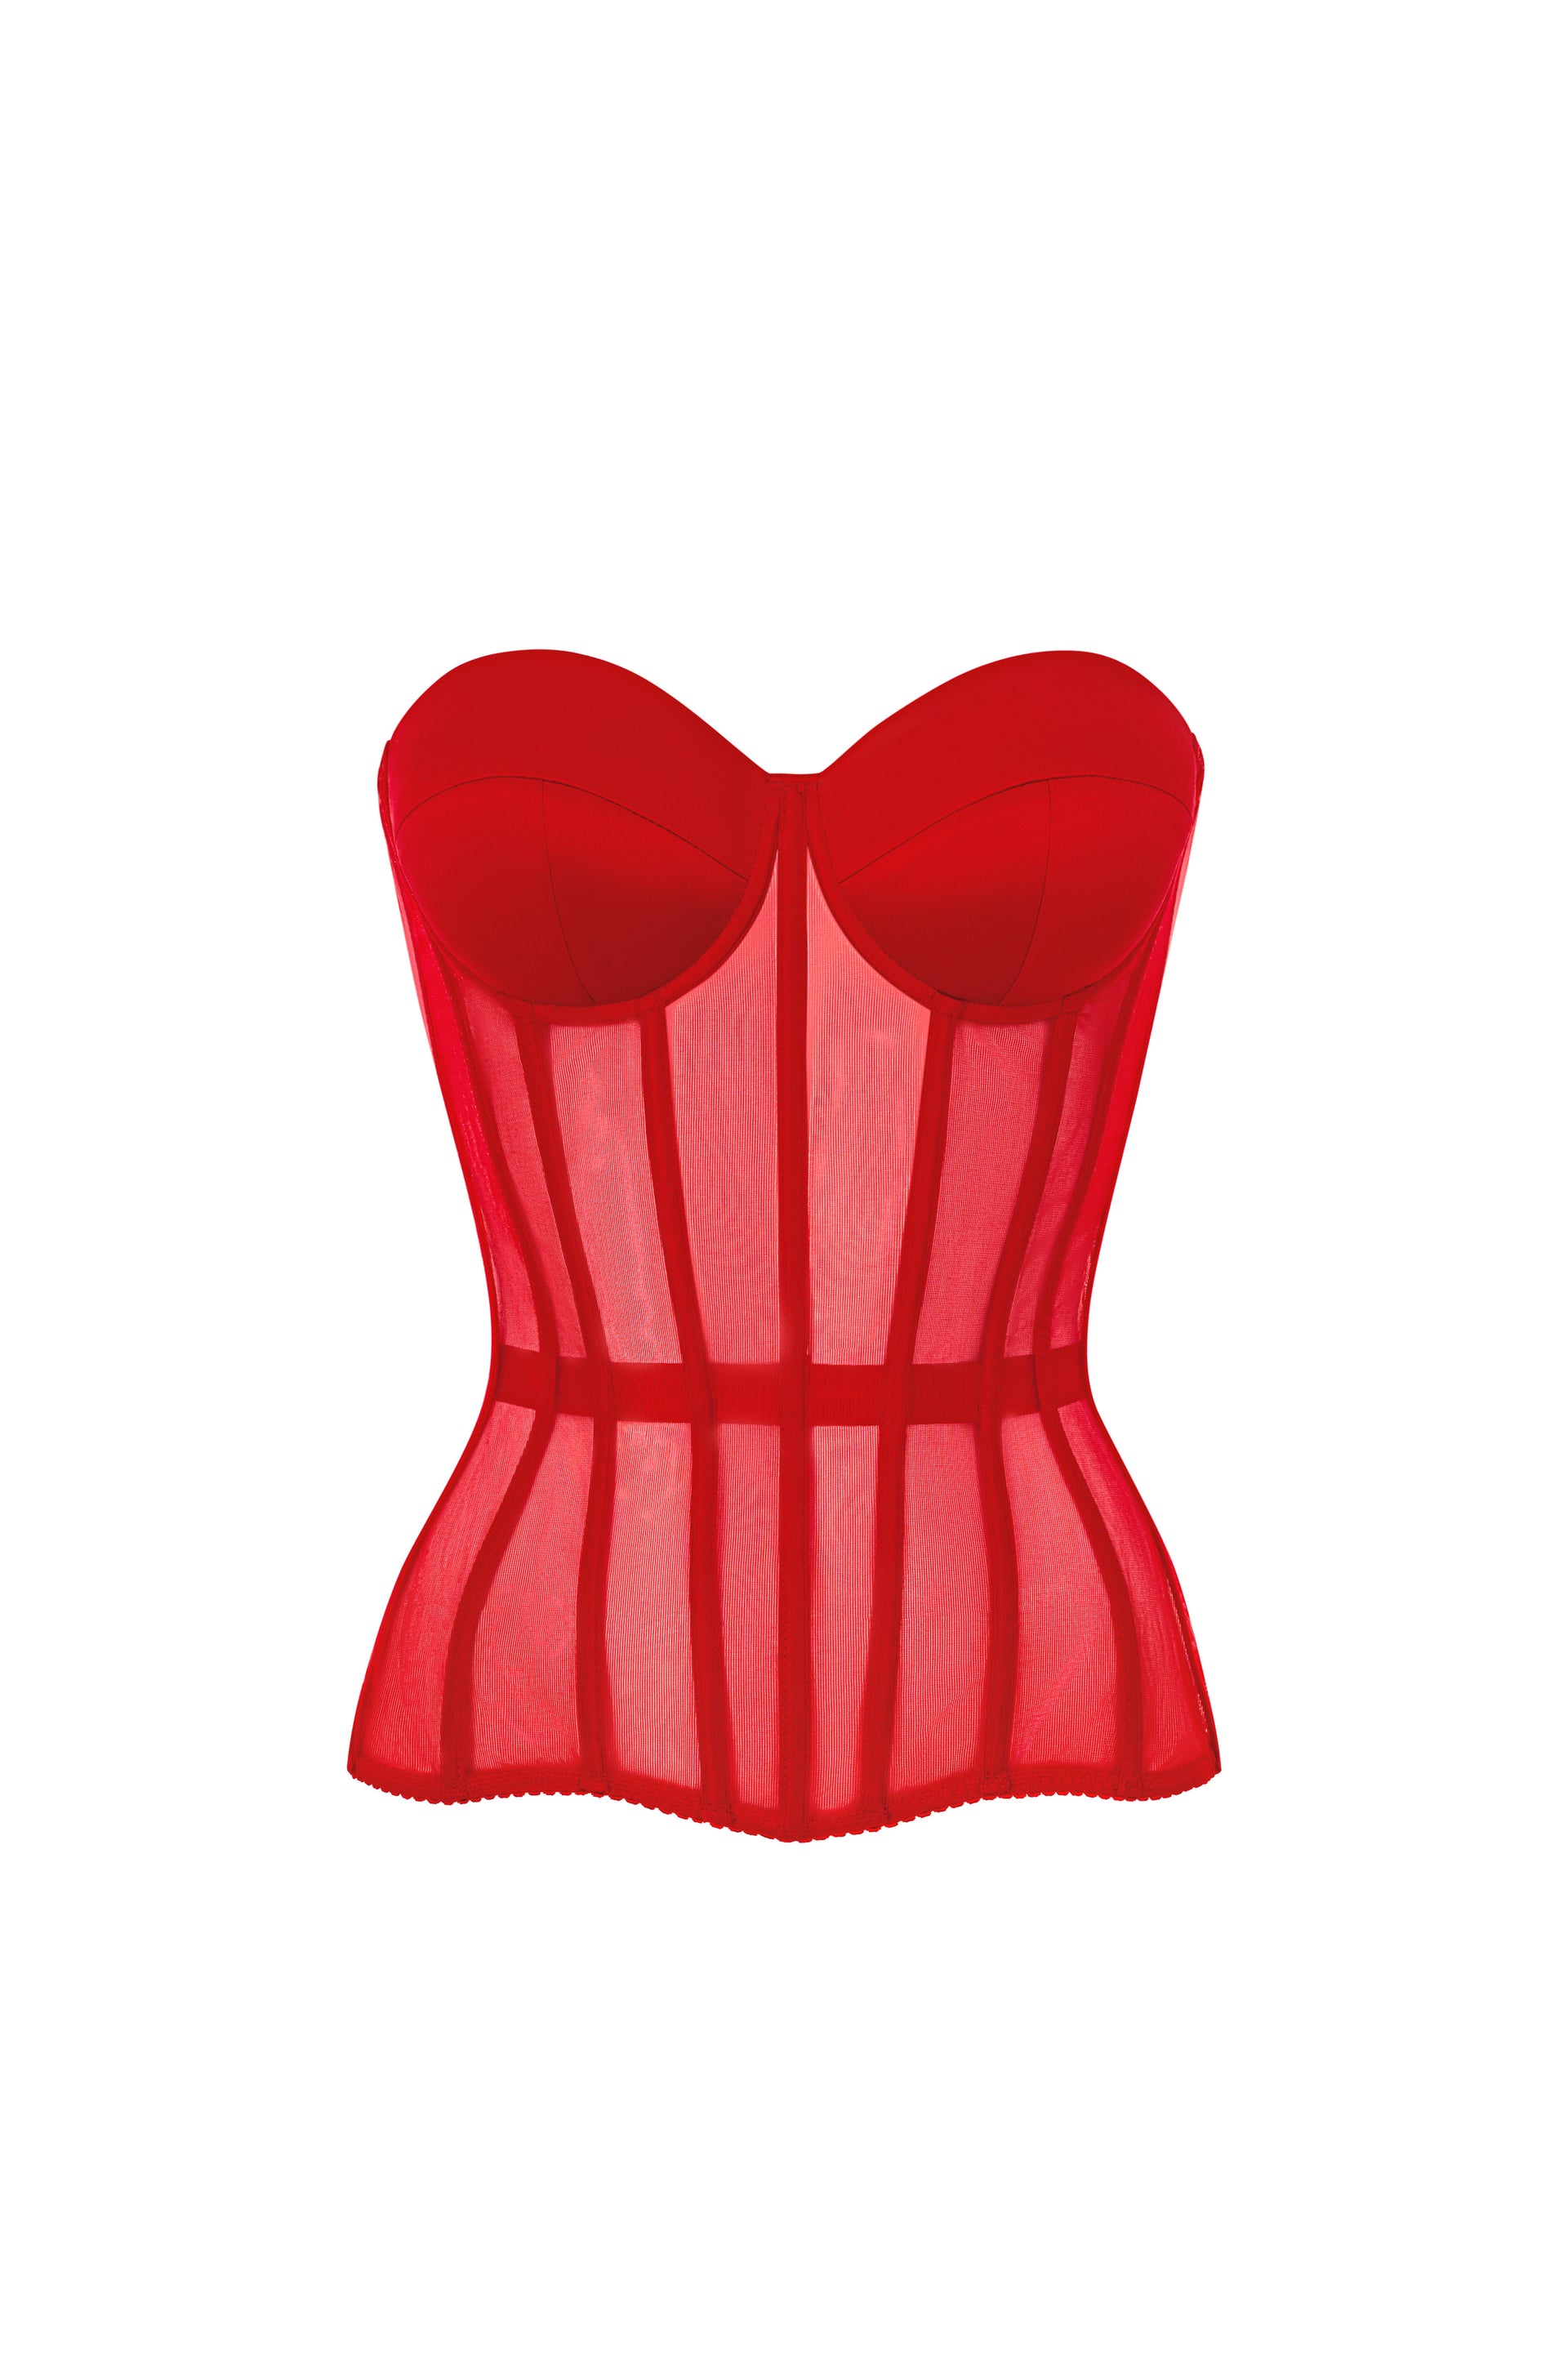 Red corset with cups - STATNAIA